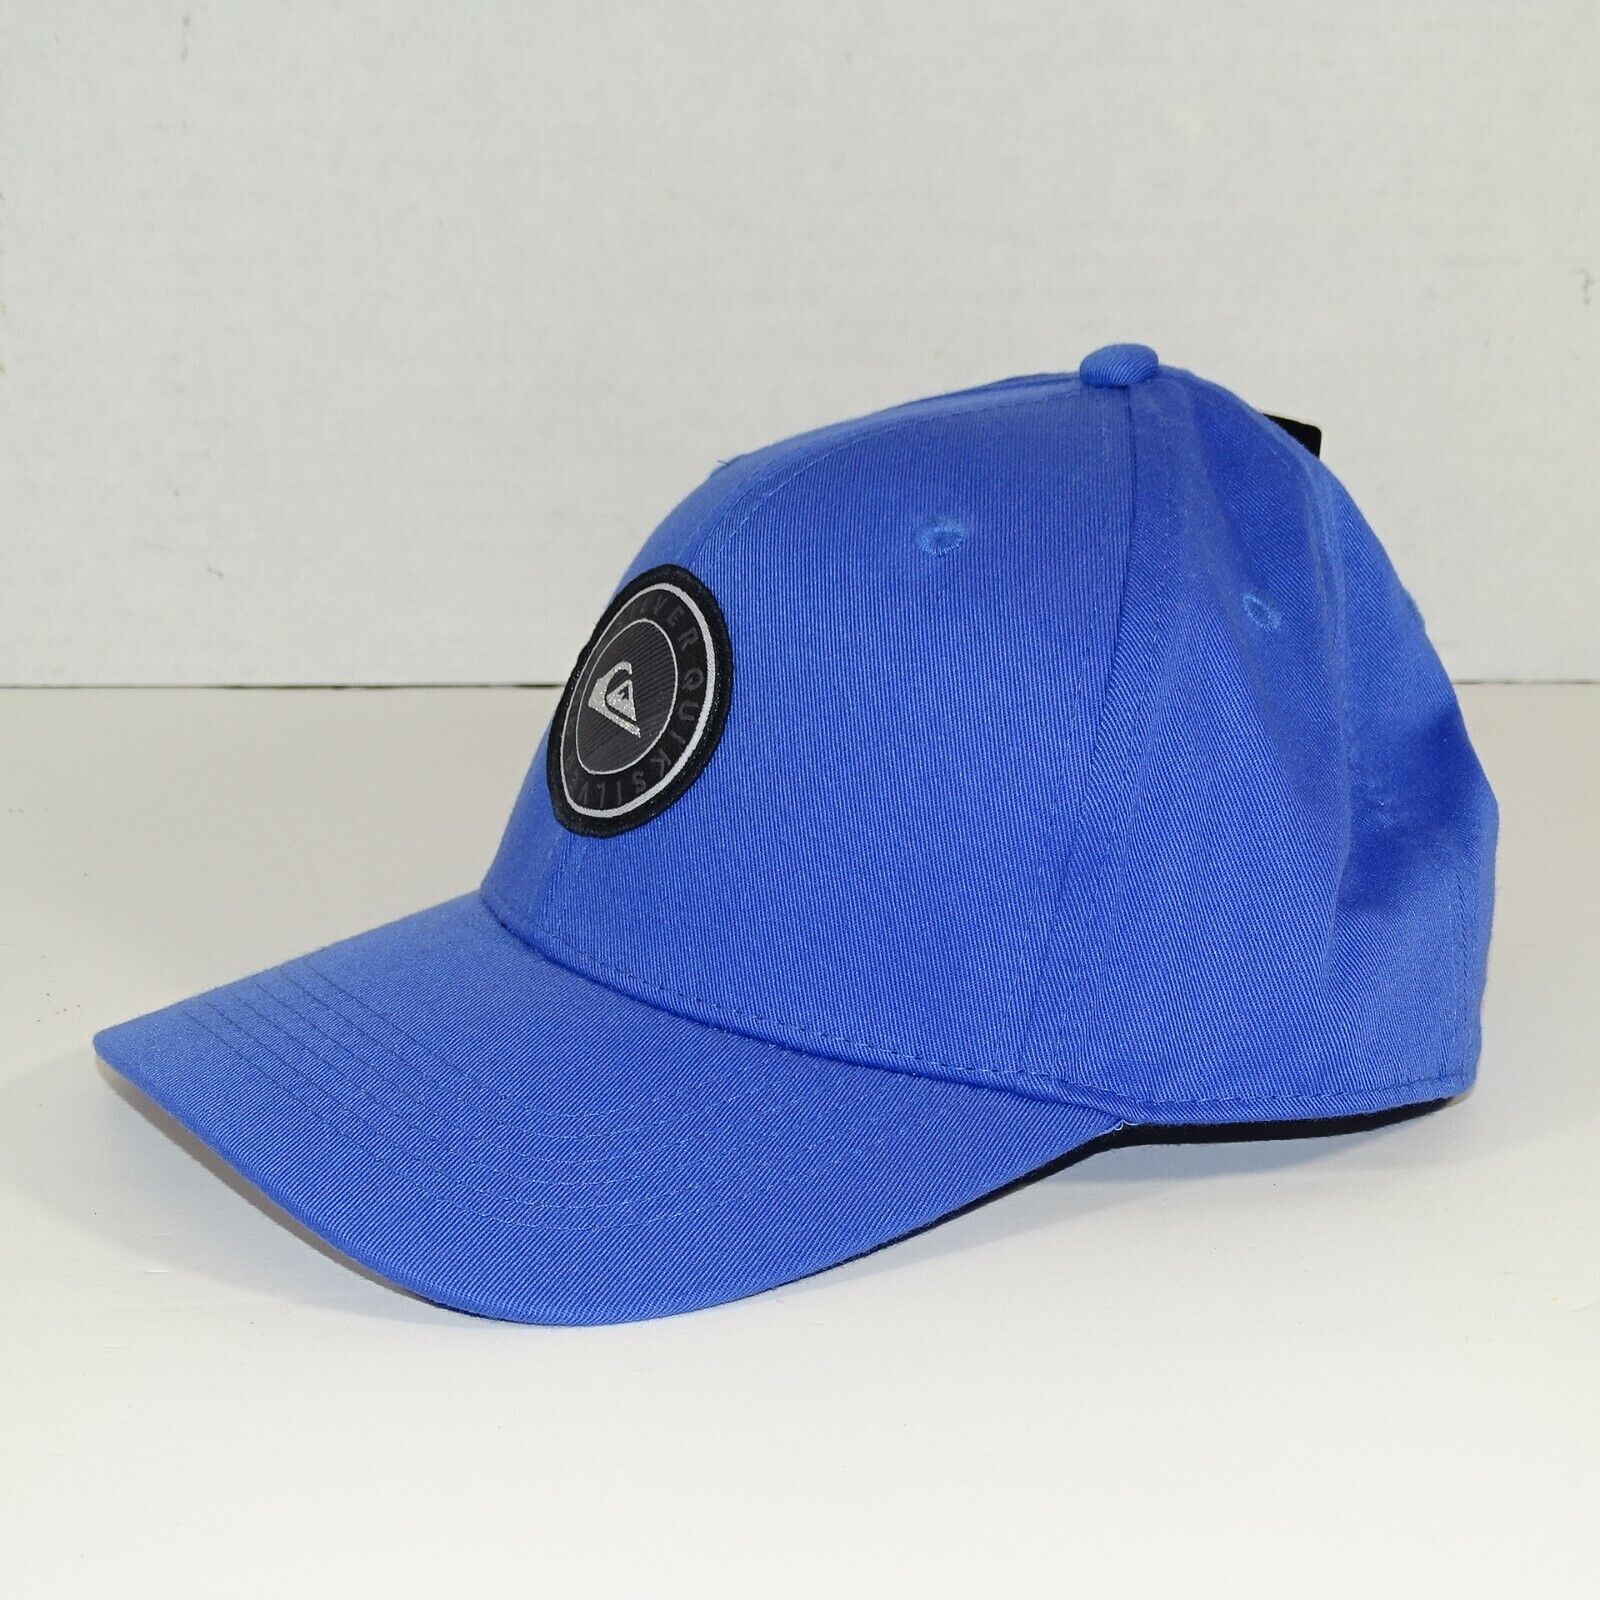 Quicksilver Decades Plus Youth Snapback Ball Cap Blue One Size Adjustable